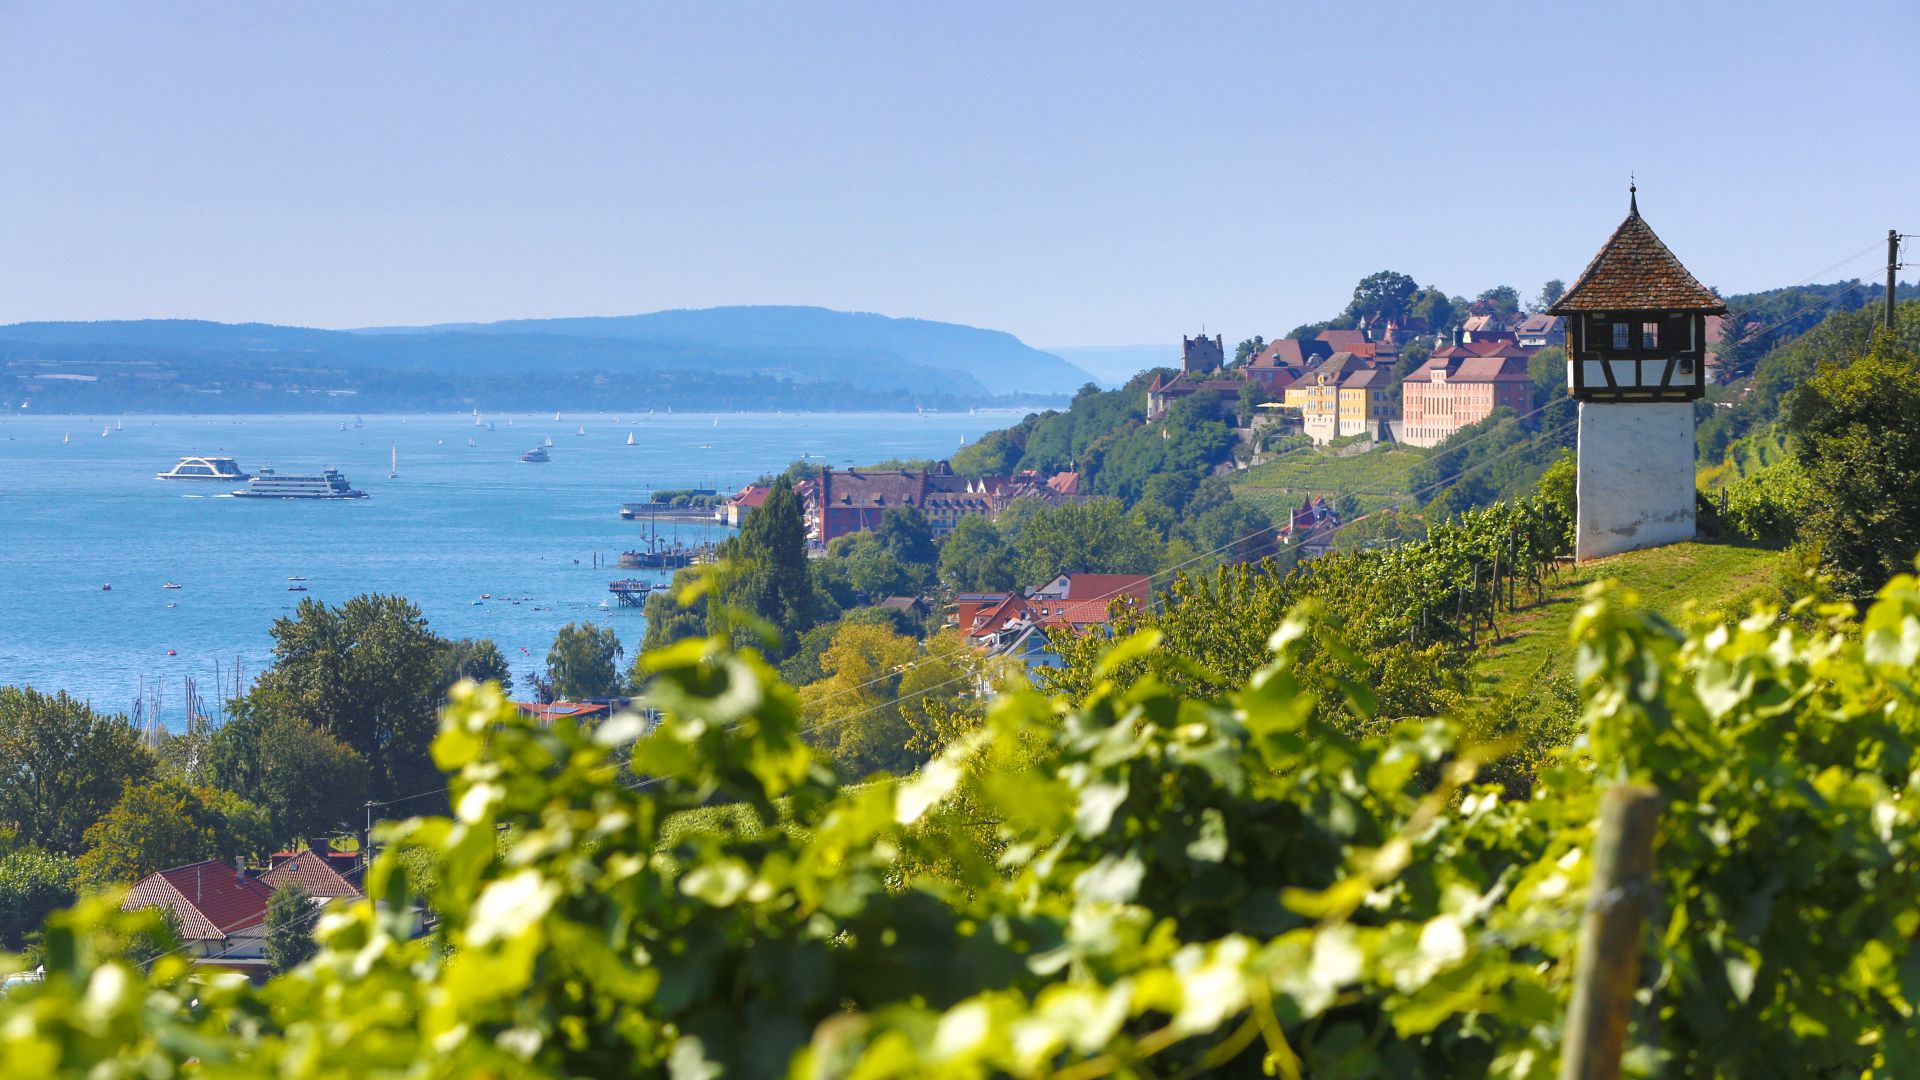 Meersburg: View from the vineyards to the castle and over the Lake Constance